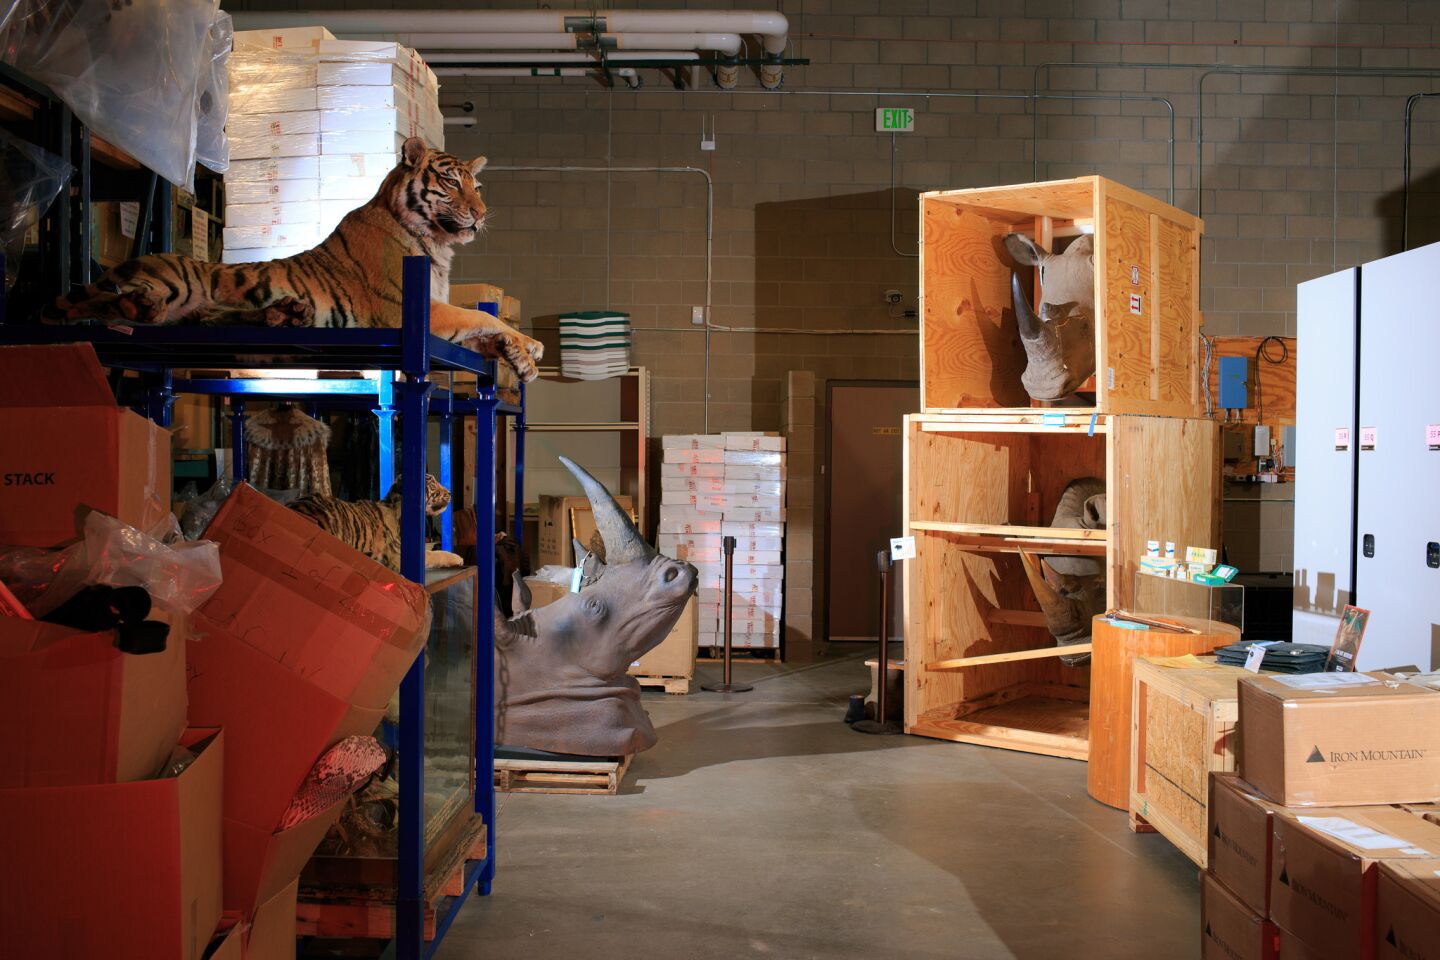 Rhinoceros mounts inside crates at the U.S. Fish and Wildlife Service National Wildlife Property Repository.